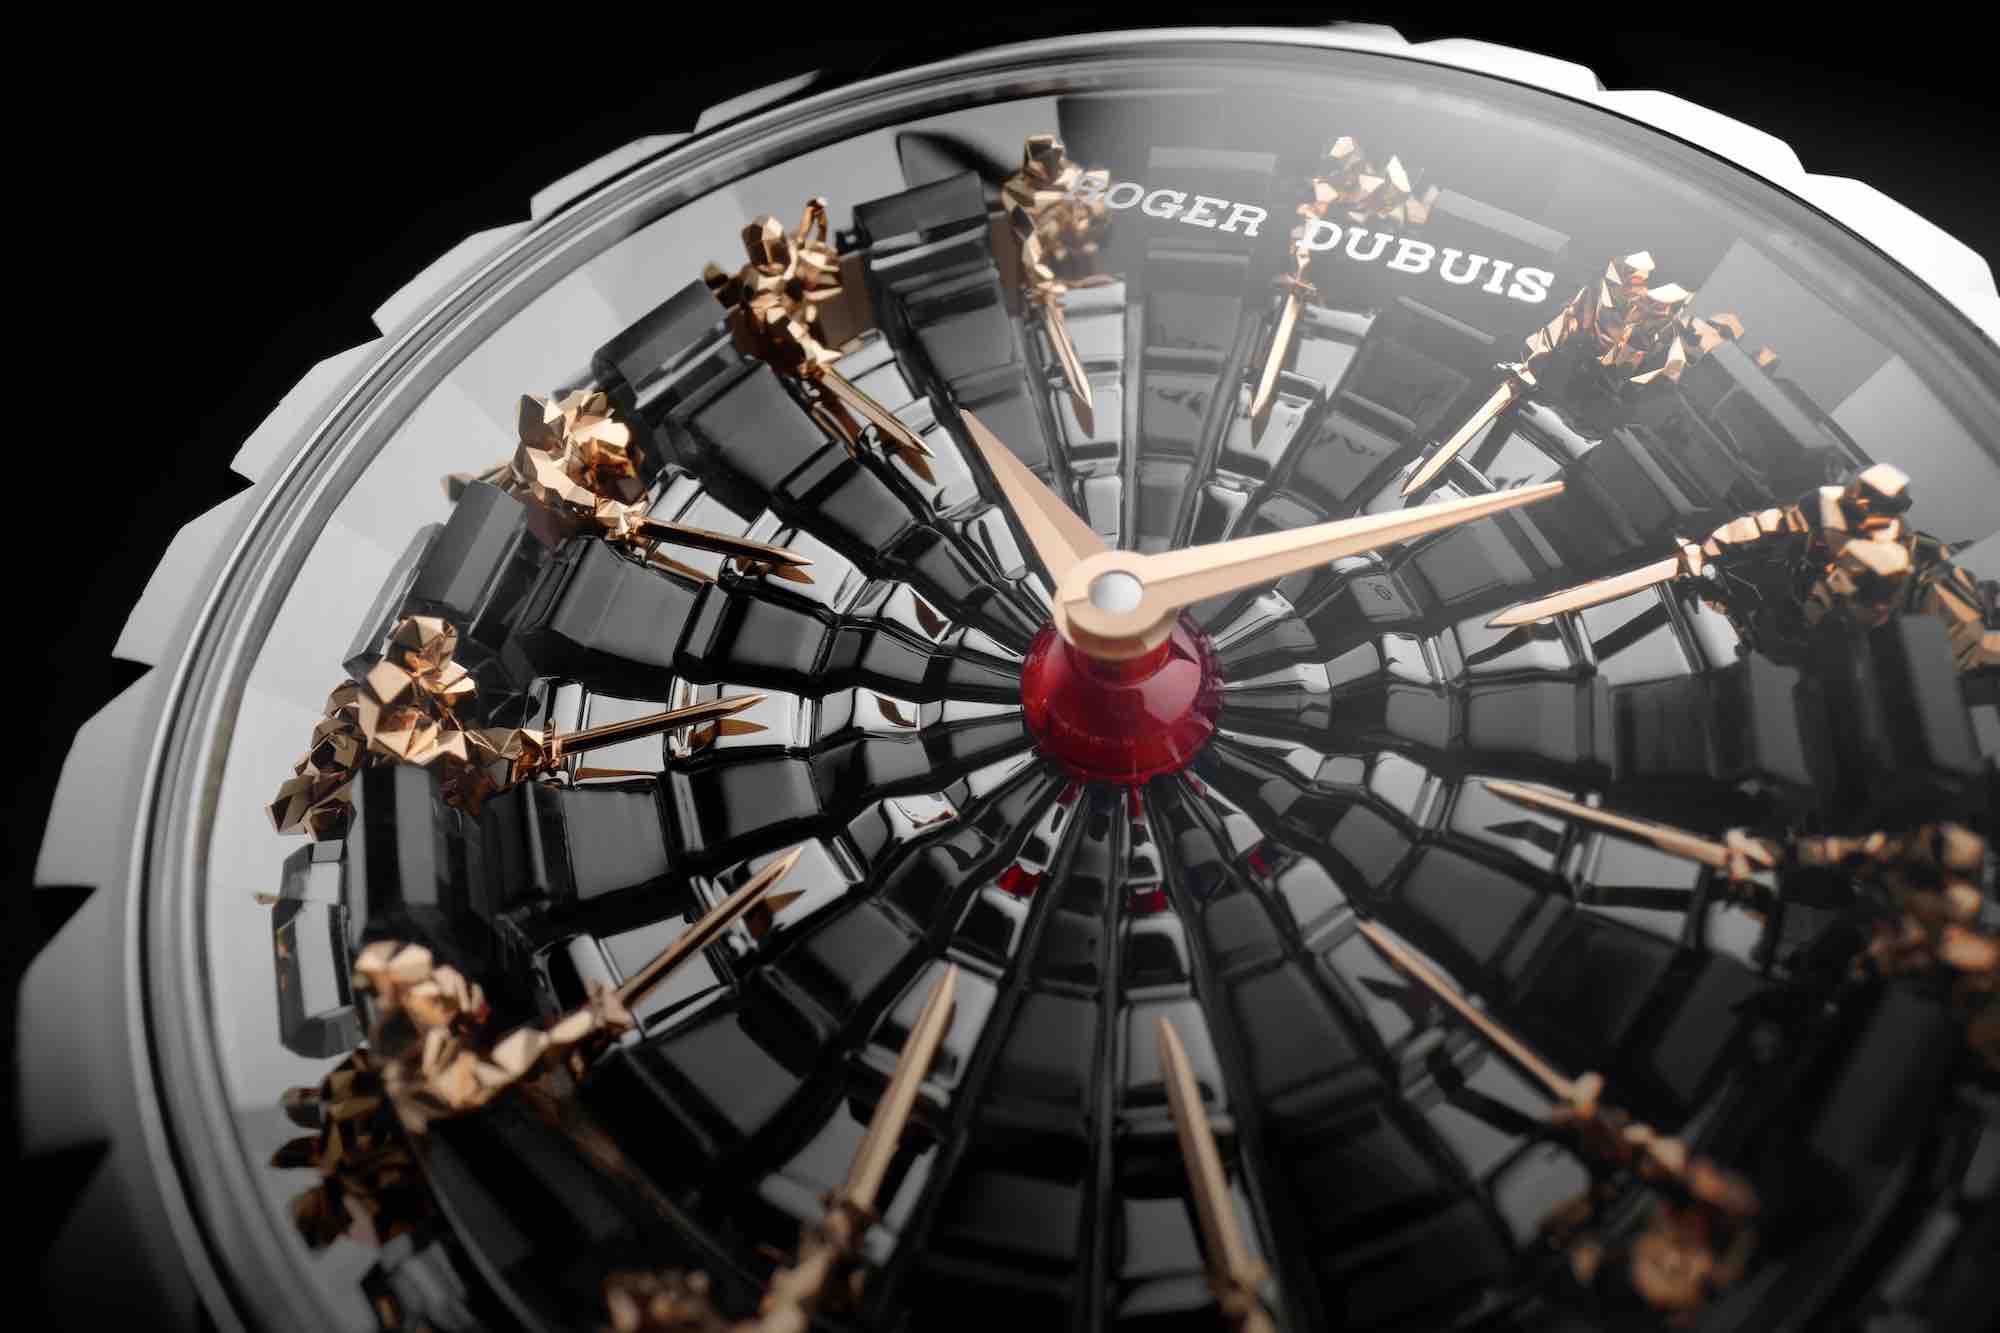 Roger Dubuis Is Holding Court With The Latest Edition Of The Knights Of The Round Table